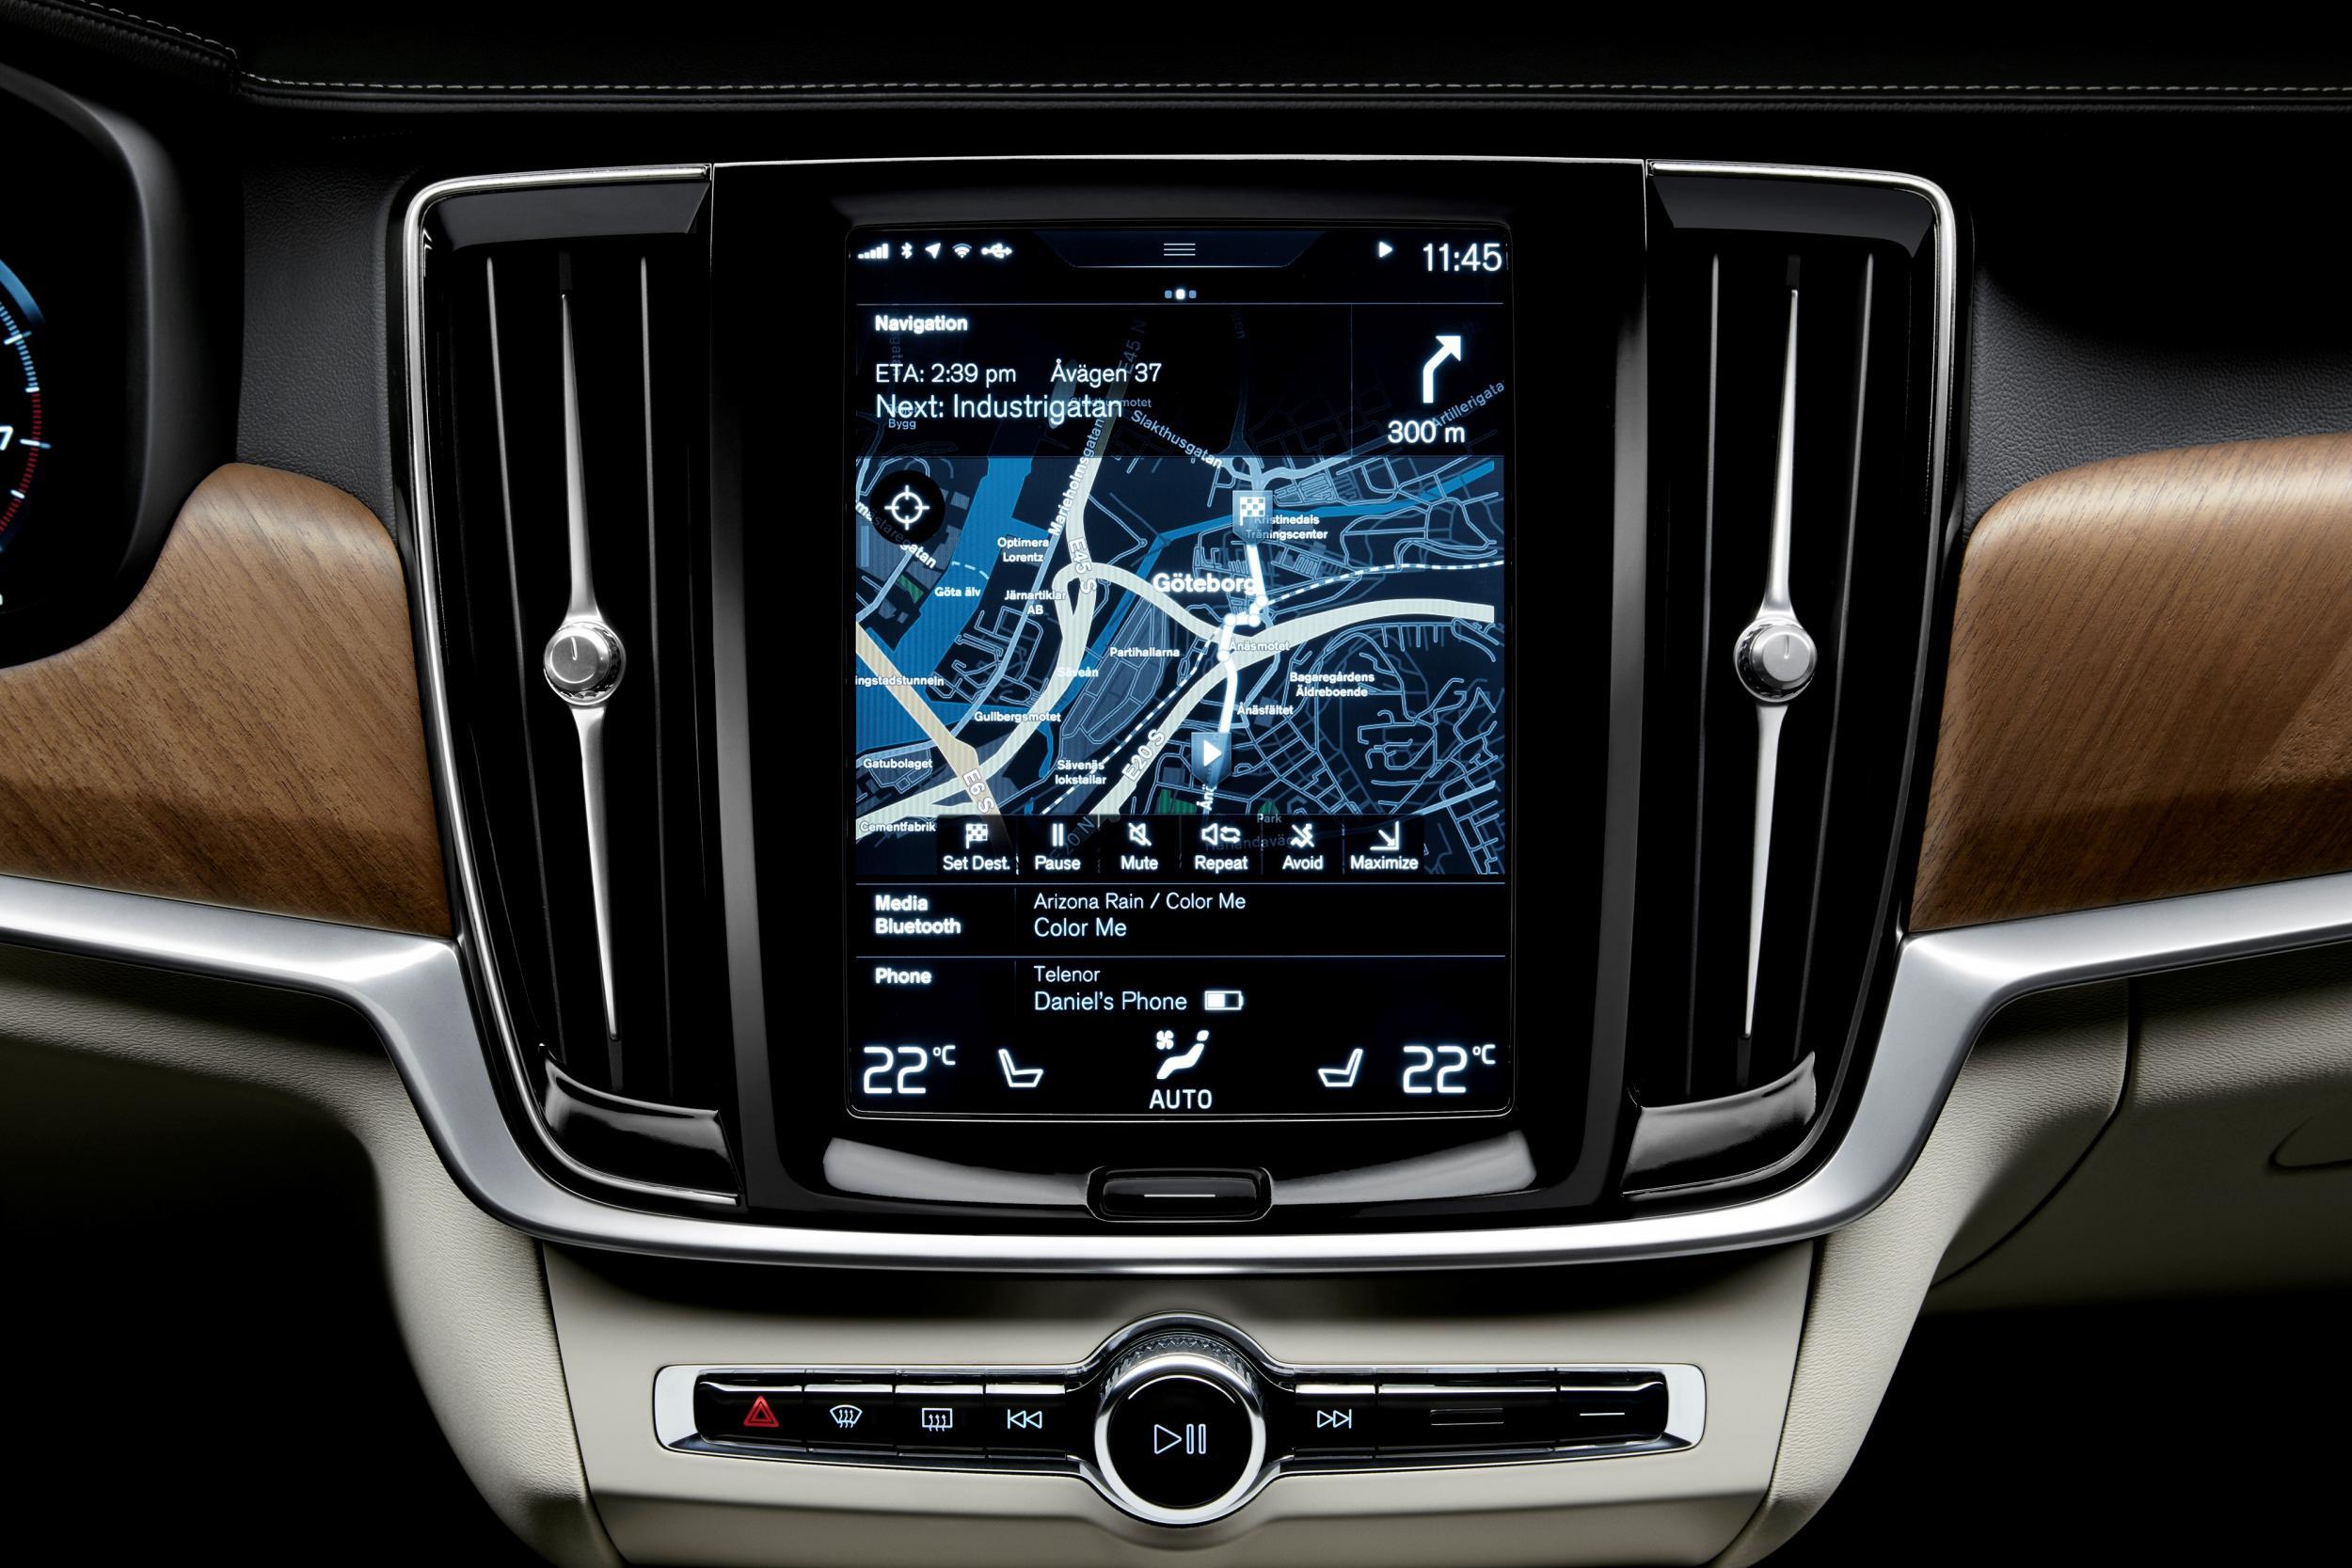 &#13;
A large touchscreen makes for less stressful driving&#13;